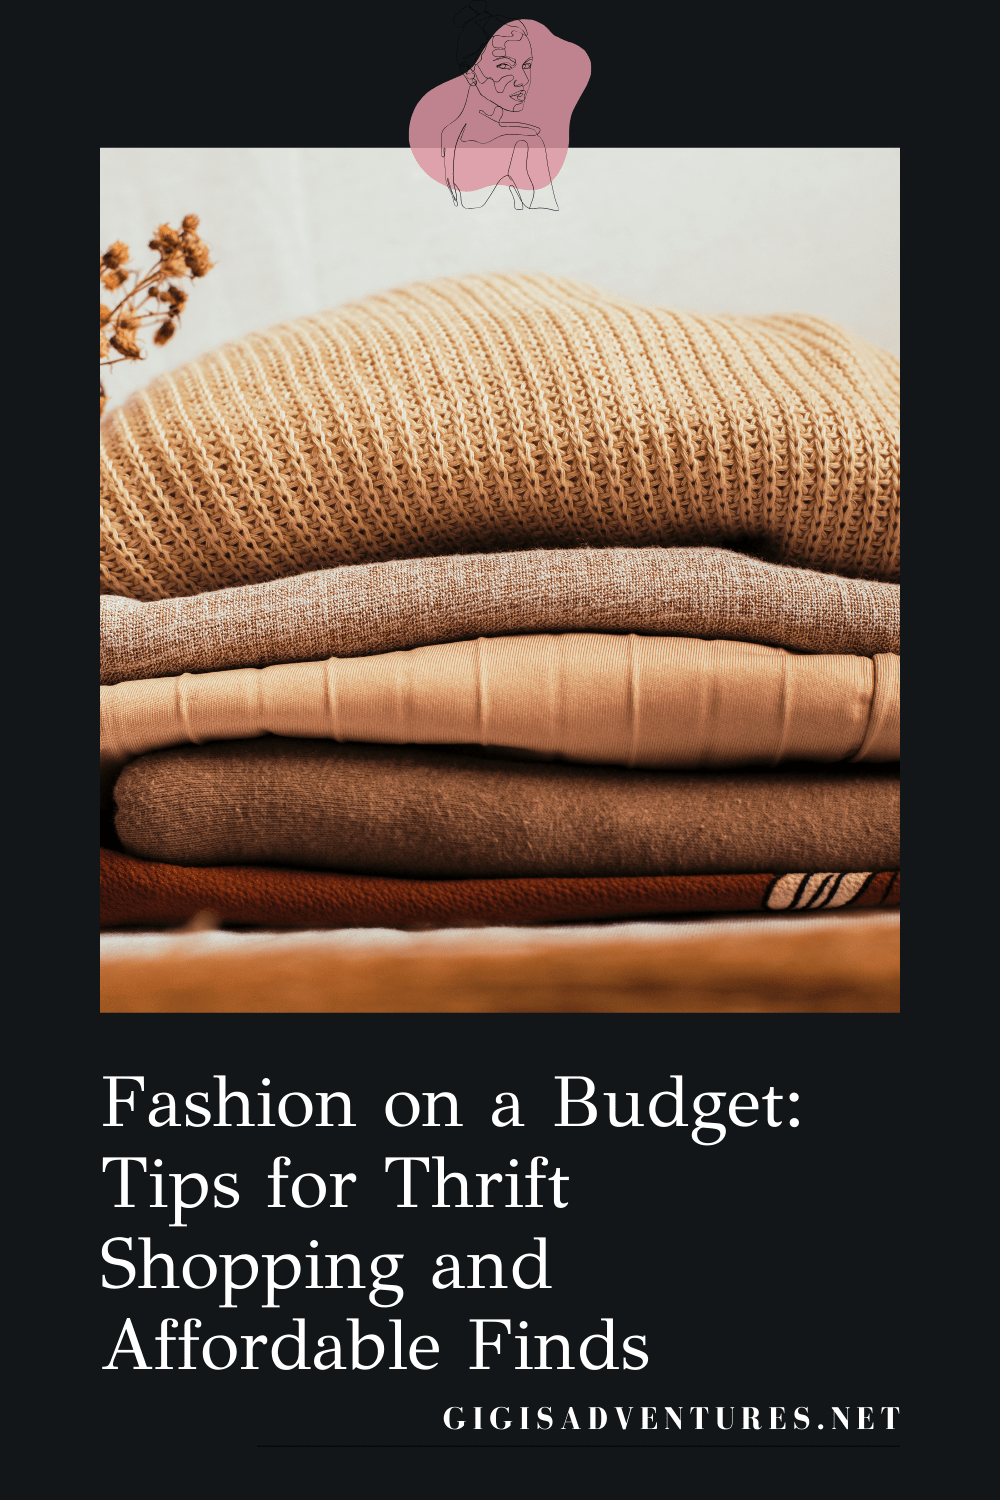 Fashion on a Budget Tips for Thrift Shopping and Affordable Finds